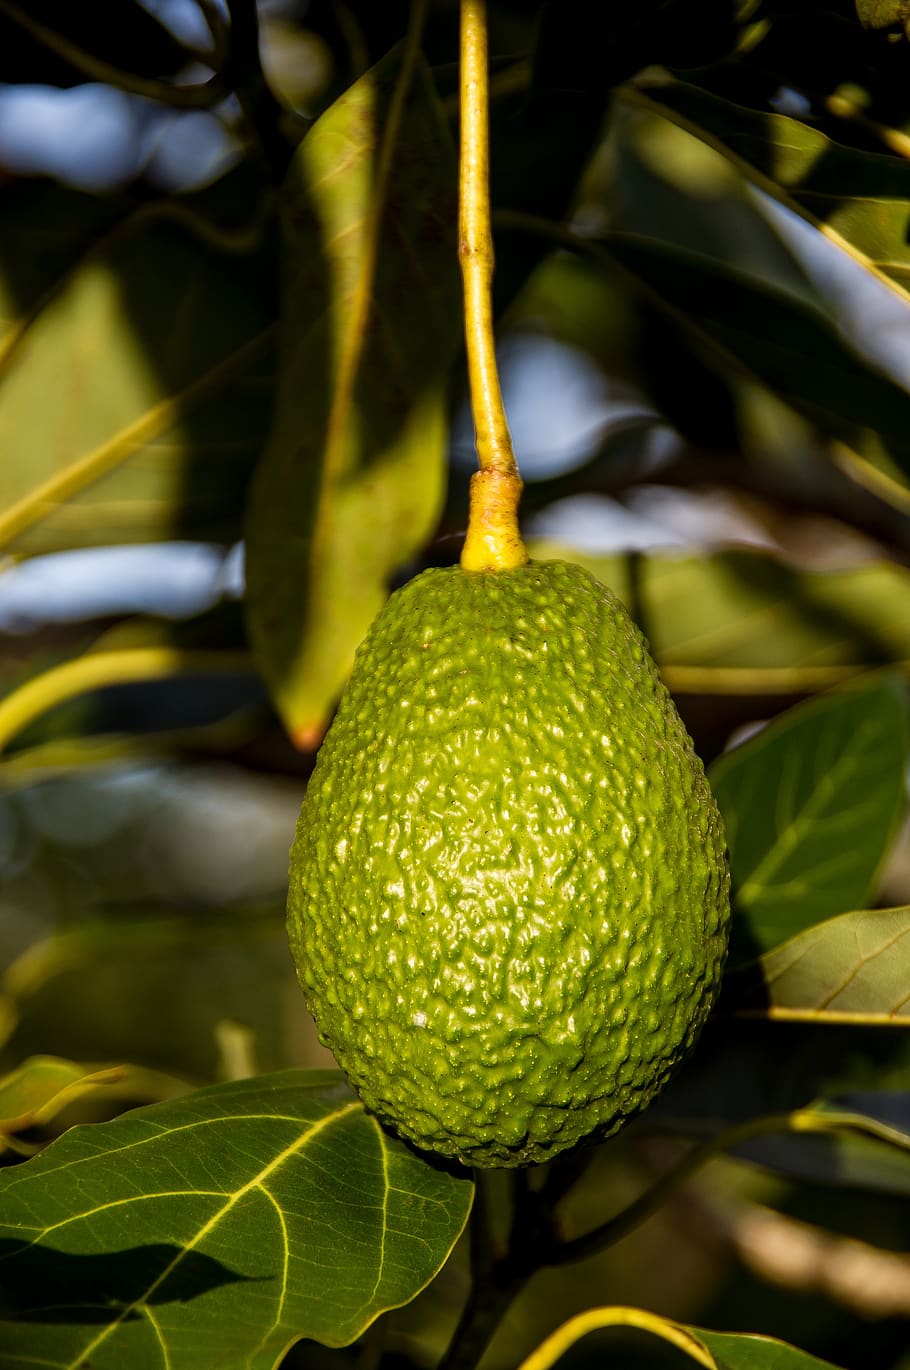 hass avocado, avocado, fruit, tree, green, growing, close-up, leaf, plant part, healthy eating